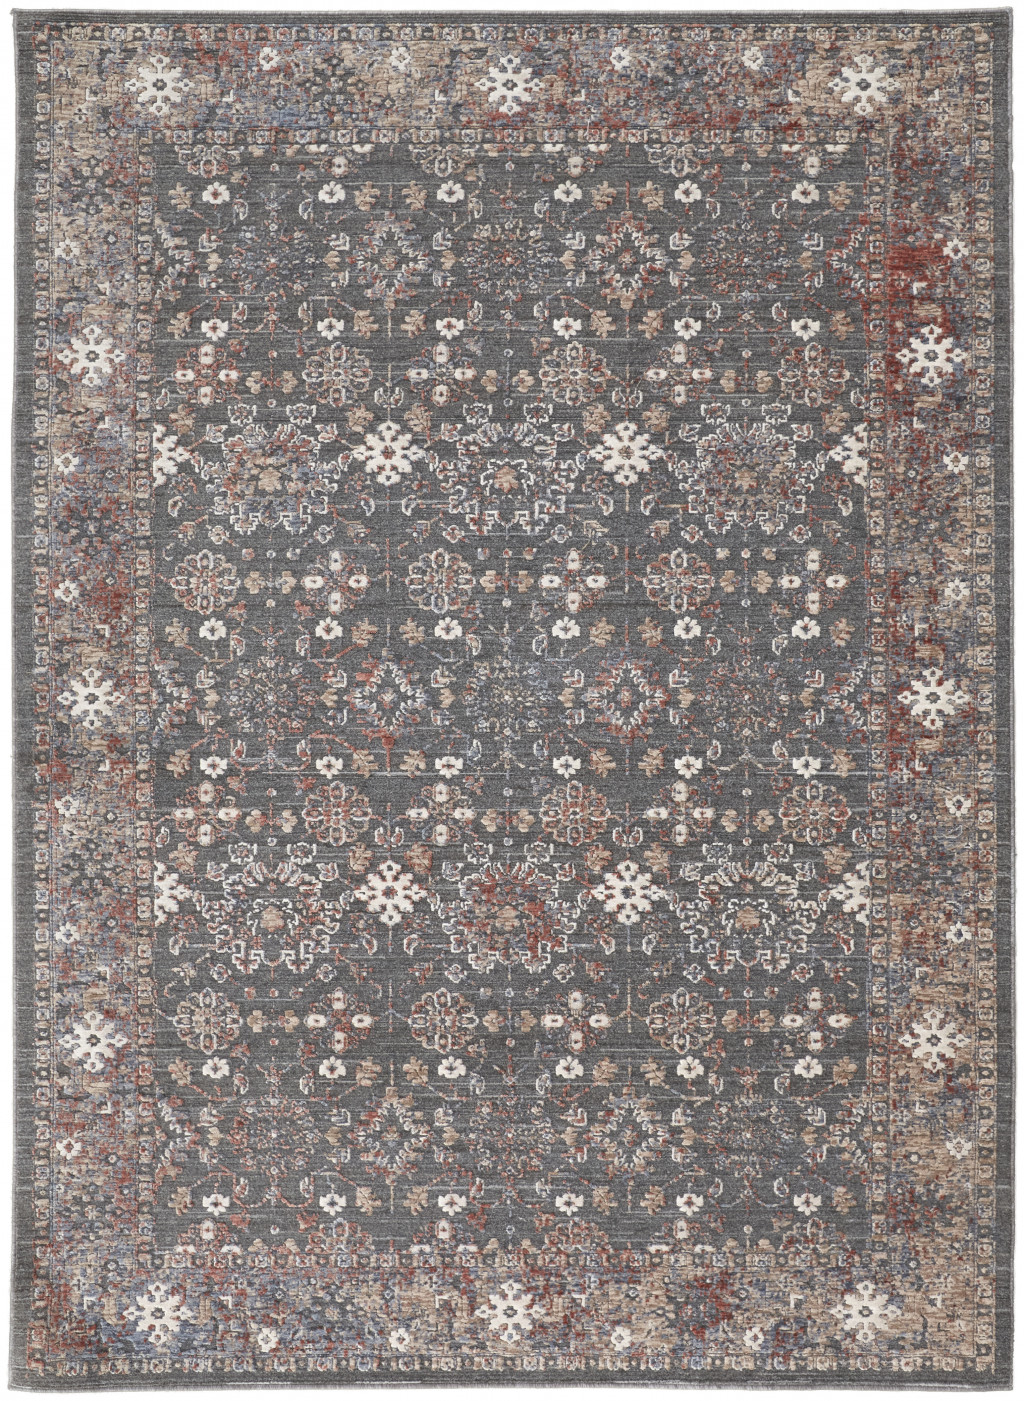 8' X 10' Gray Pink And Red Floral Power Loom Area Rug-514888-1